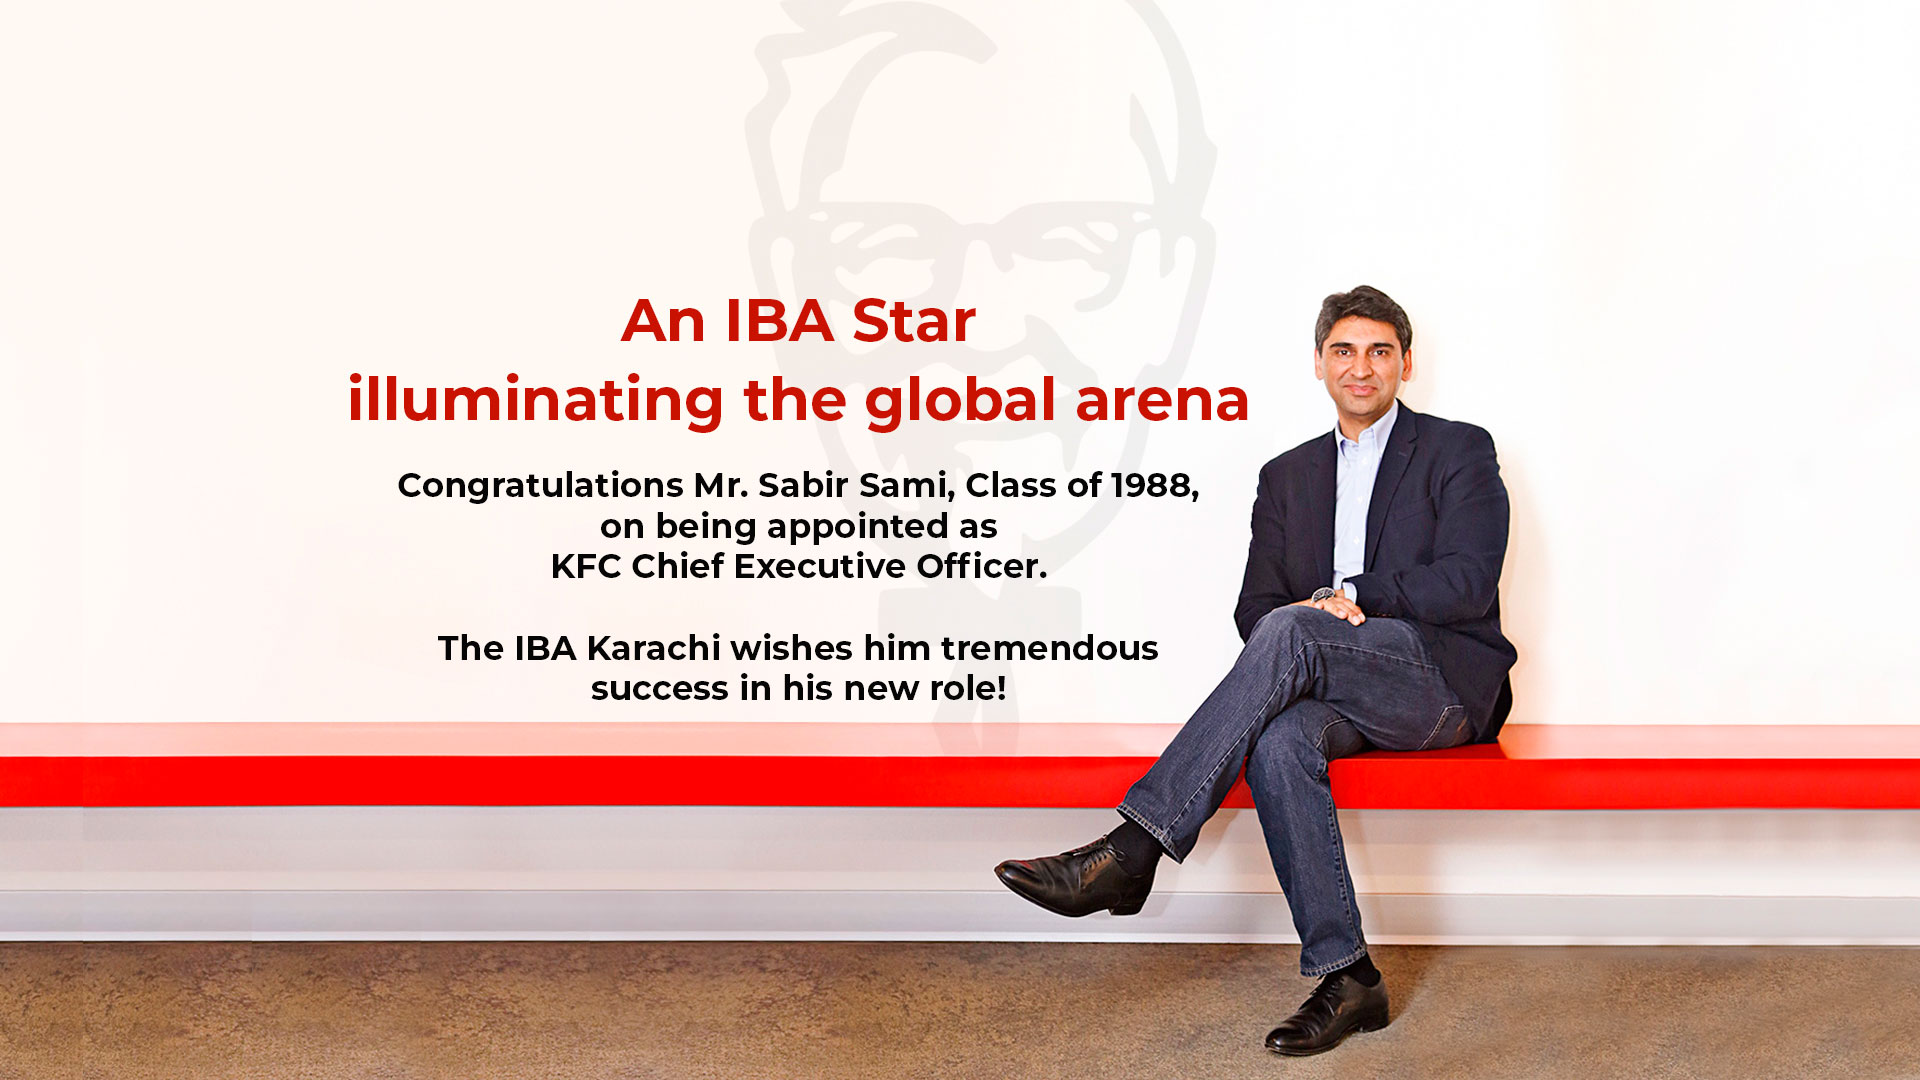 IBA alumnus appointed as KFC Chief Executive Officer